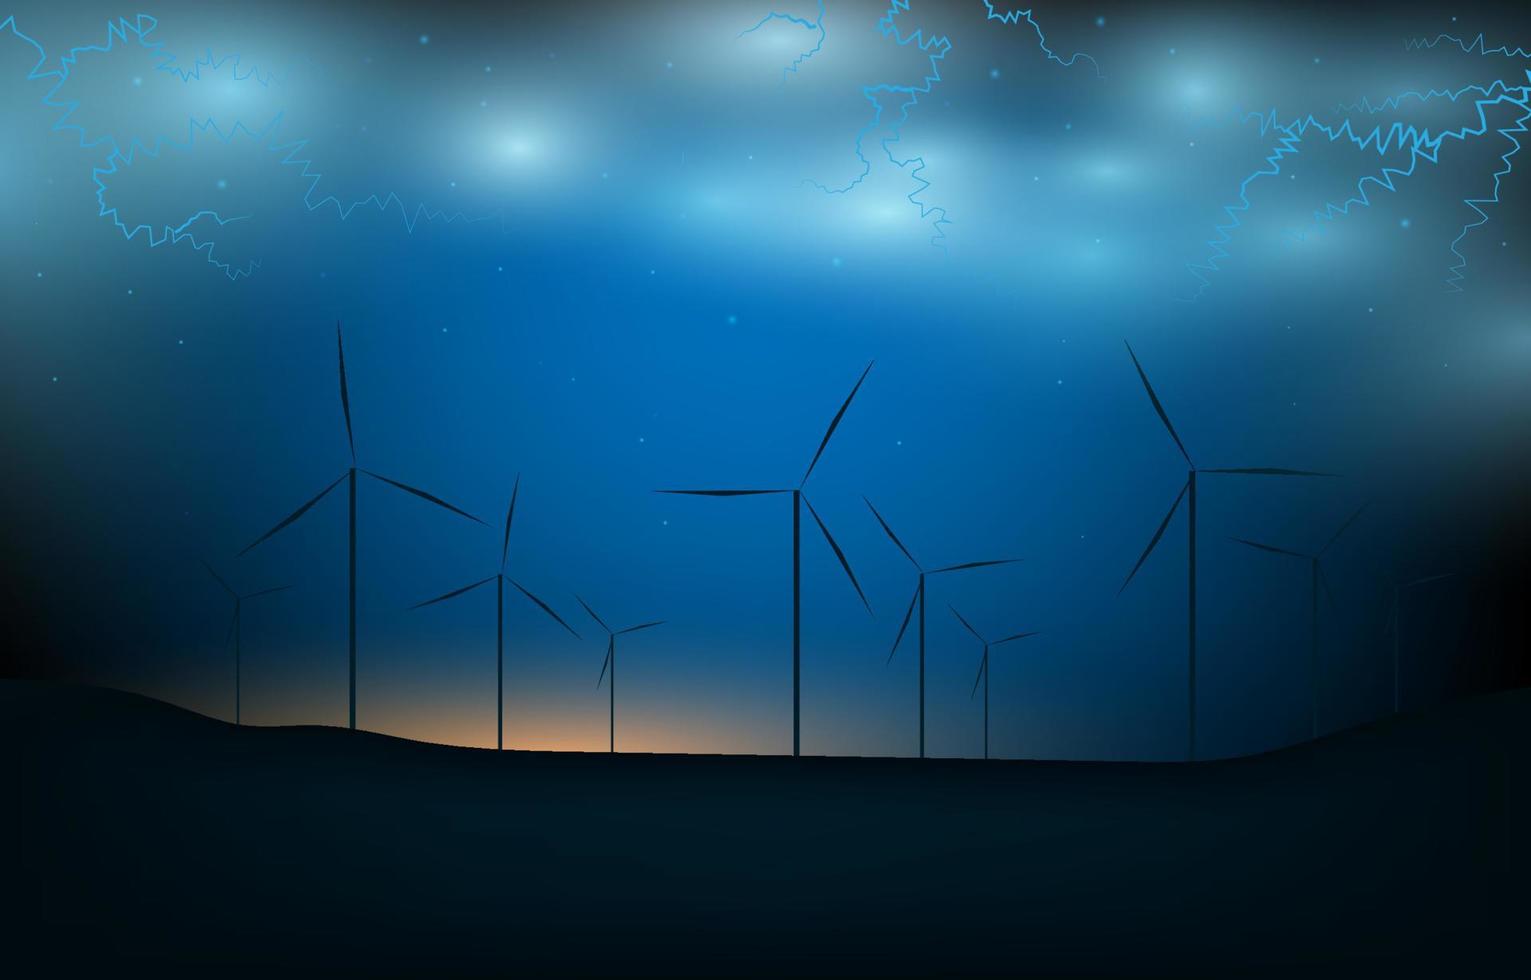 Renewable and eco friendly energy Concept. Technology windmill energy. Abstract windmill with sunrise, lightning and mountain on gradient blue background. Wind power turbine landscape vector. vector